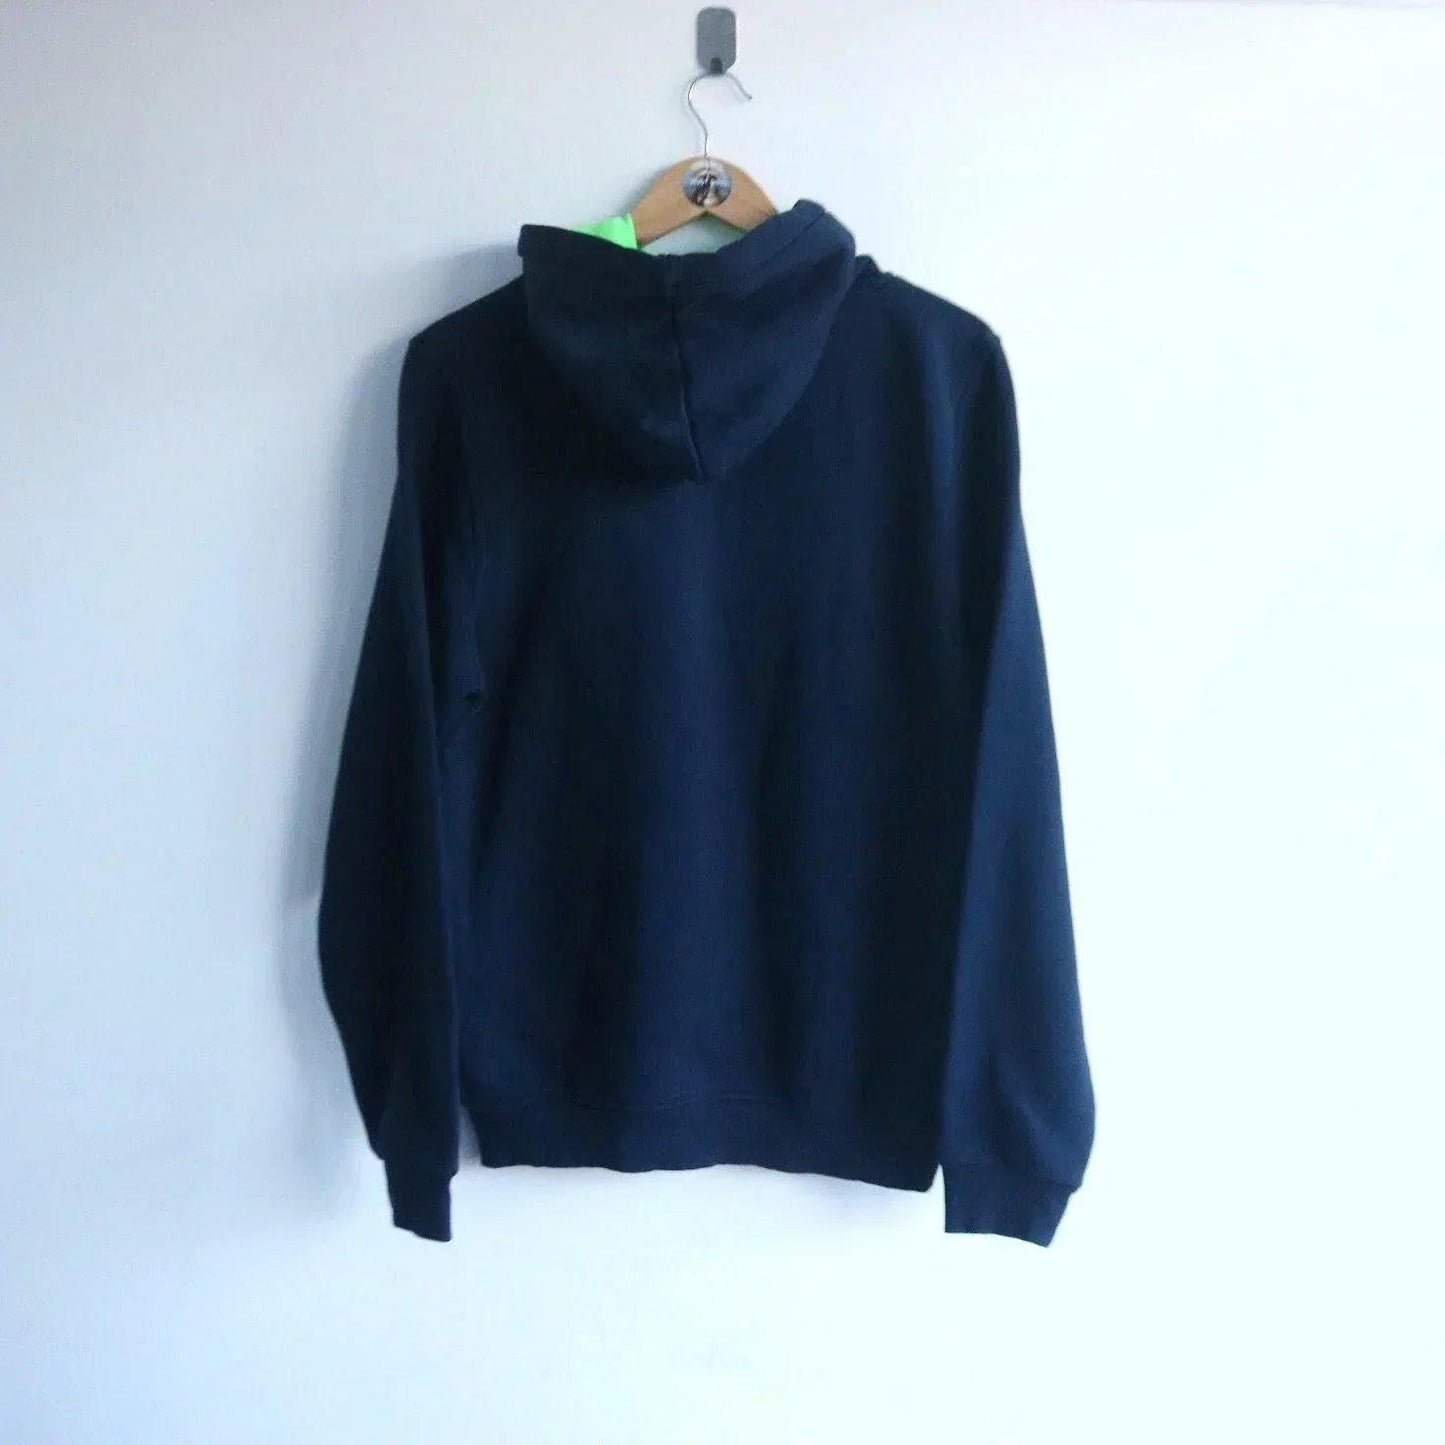 Hugo Boss Spellout Hoodie (XL) (L) (L) - Known Source